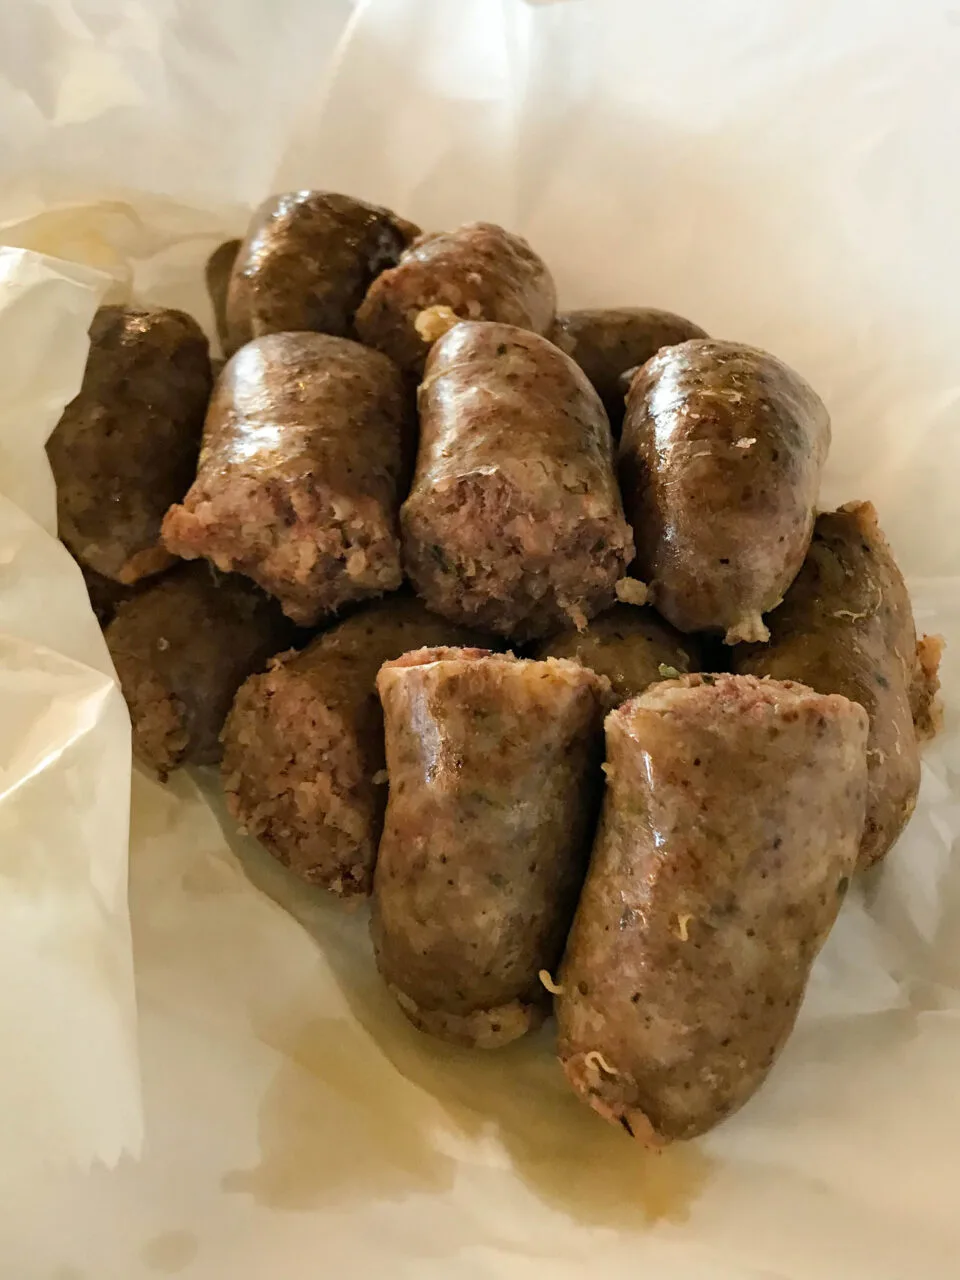 Boudin, a local sausage made with pork and rice.